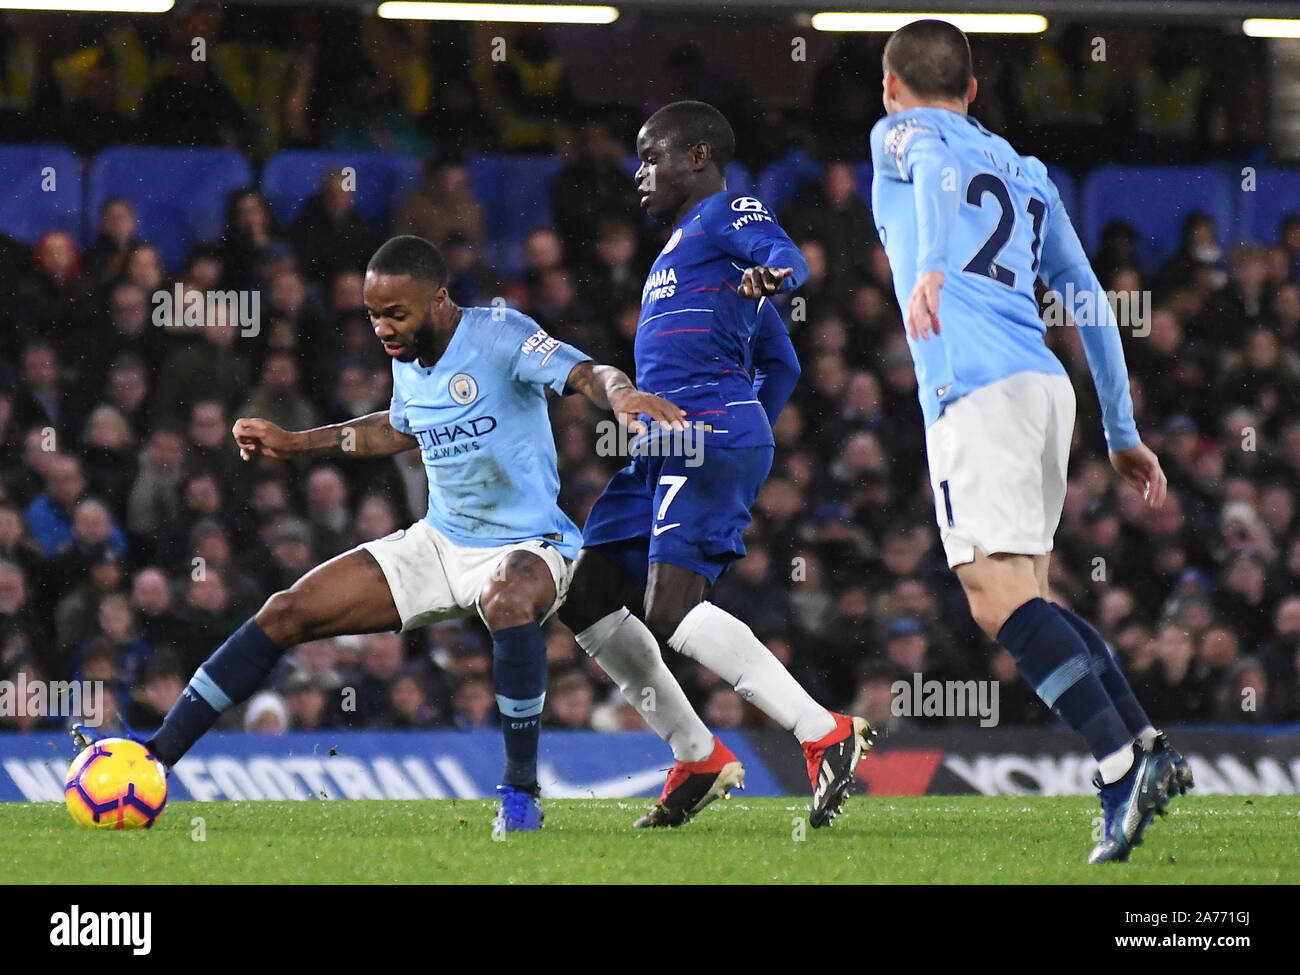 LONDON, ENGLAND - DECEMBER 8, 2018: Raheem Sterling of City (L) and N'Golo Kante of Chelsea (R) pictured during the 2018/19 Premier League game between Chelsea FC and Manchester City at Stamford Bridge. Stock Photo